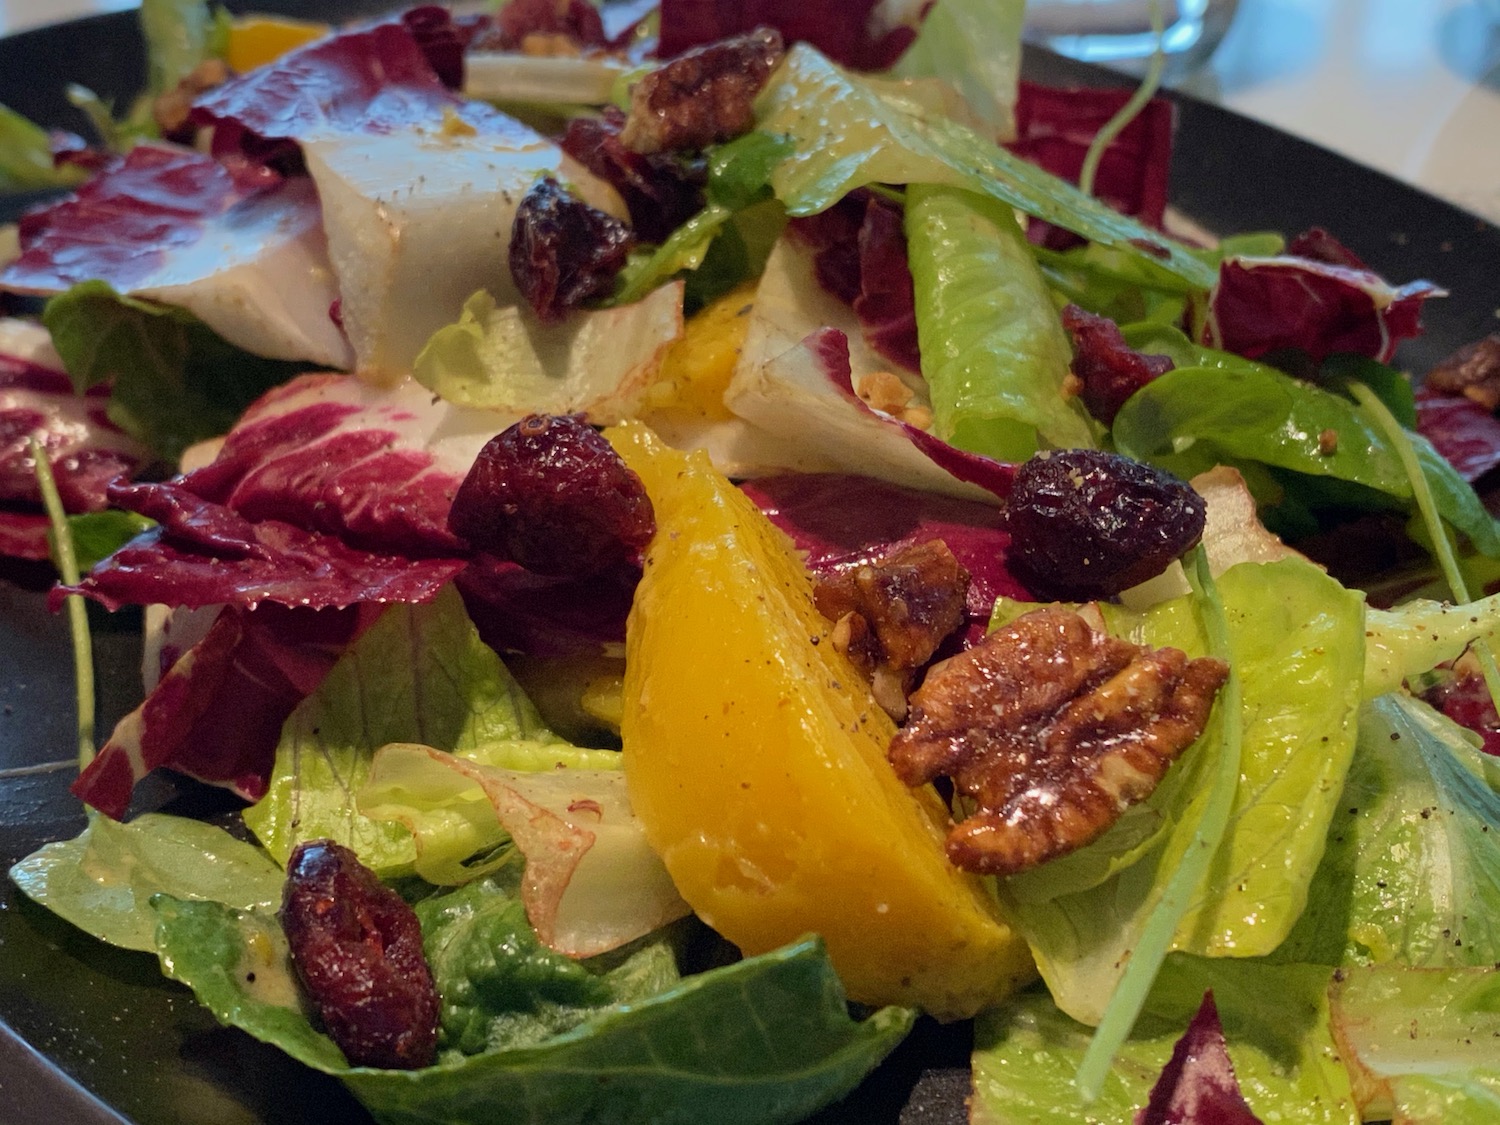 a salad with fruit and nuts